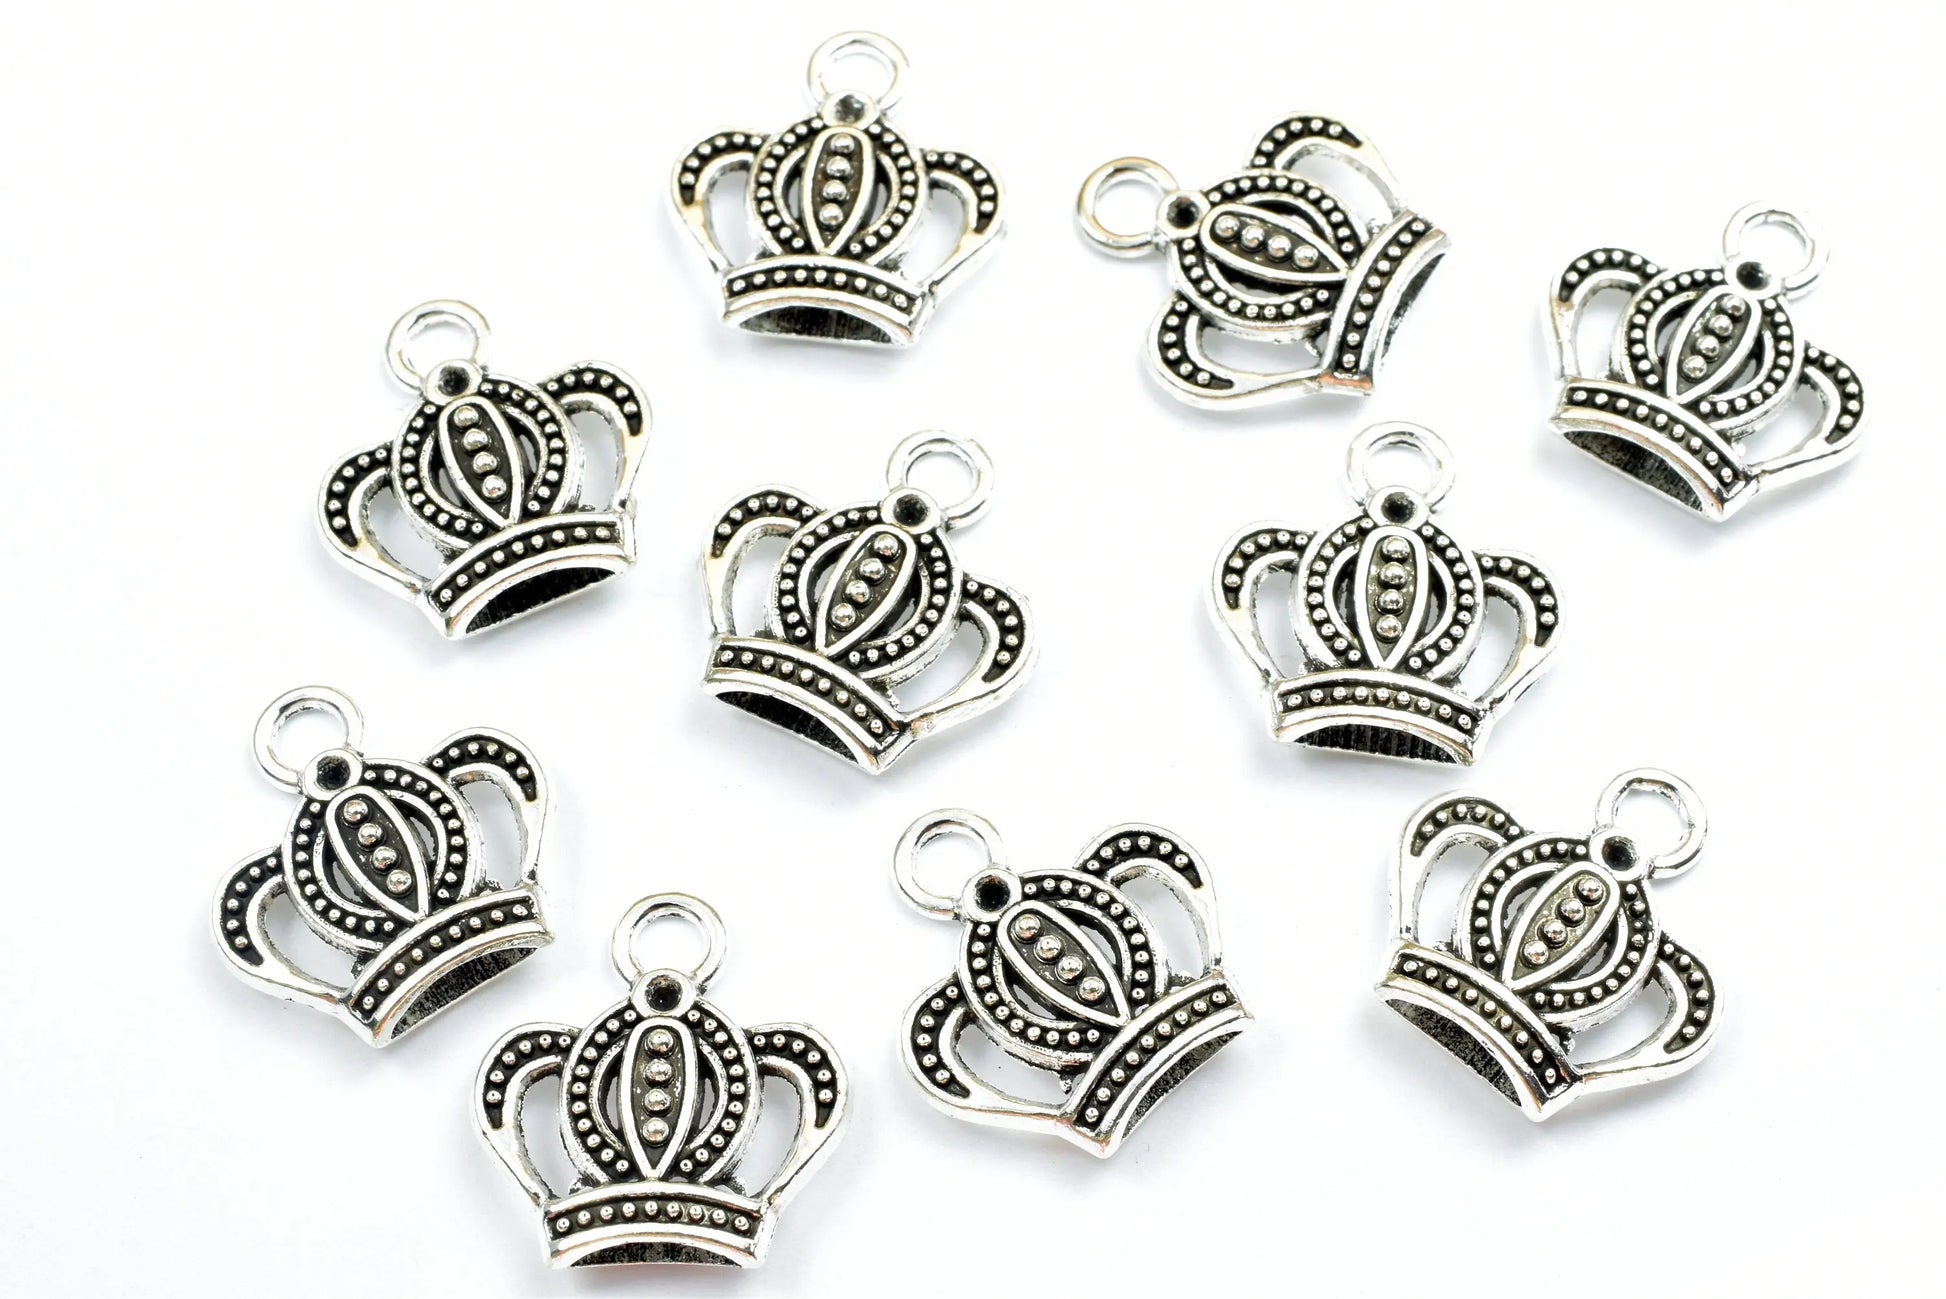 Crown Charm Size 17x16mm, 18x22mm Antique Tibetan Silver Tone Princess Charm Pendant Finding For Jewelry Making - BeadsFindingDepot